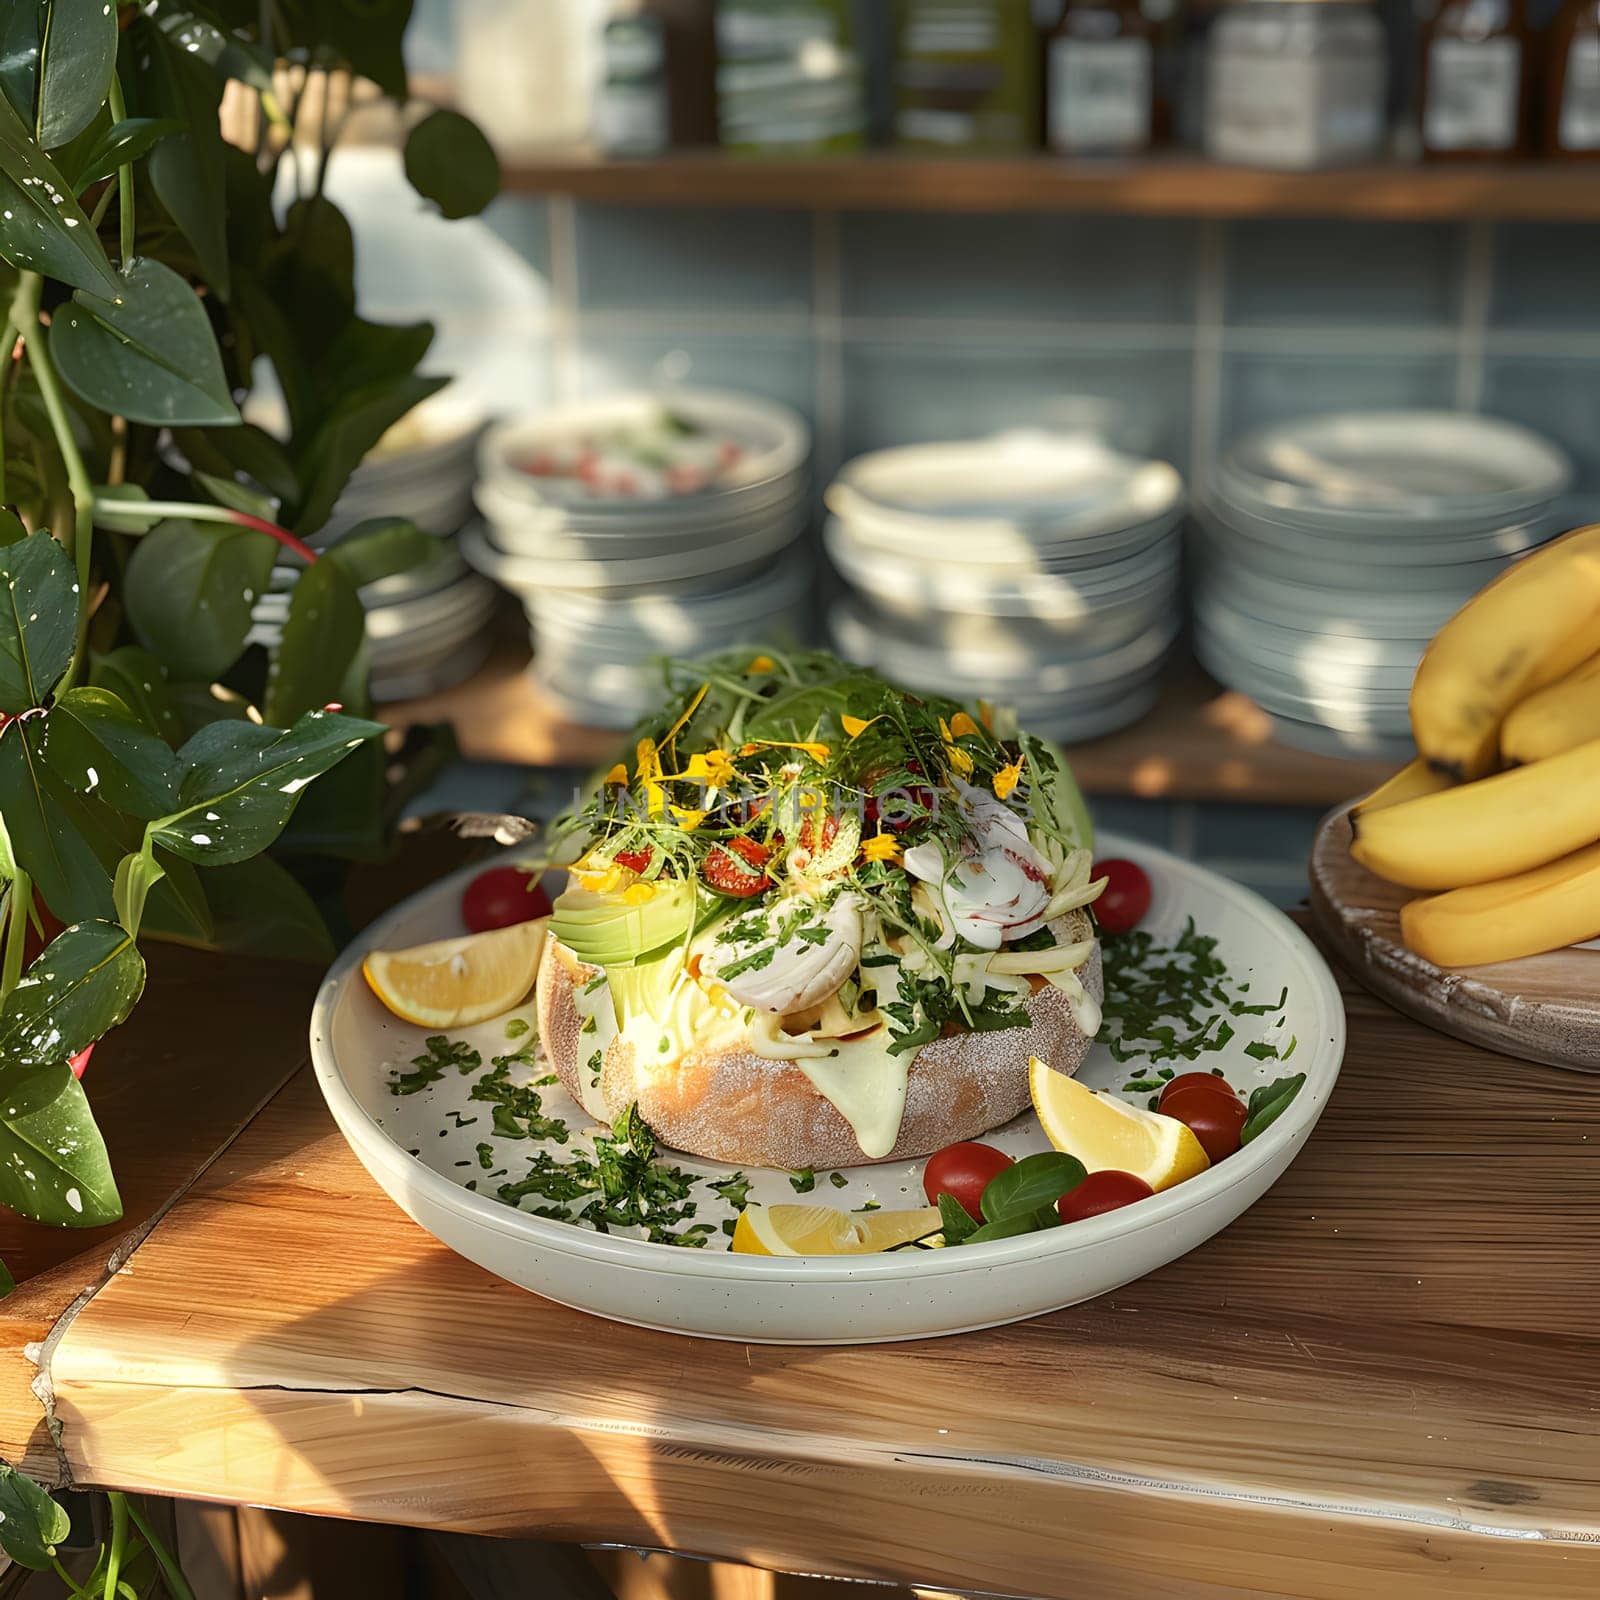 A dish of plantainbased food presented on a wooden table, with Saba bananas in the background as part of the ingredients for the recipe